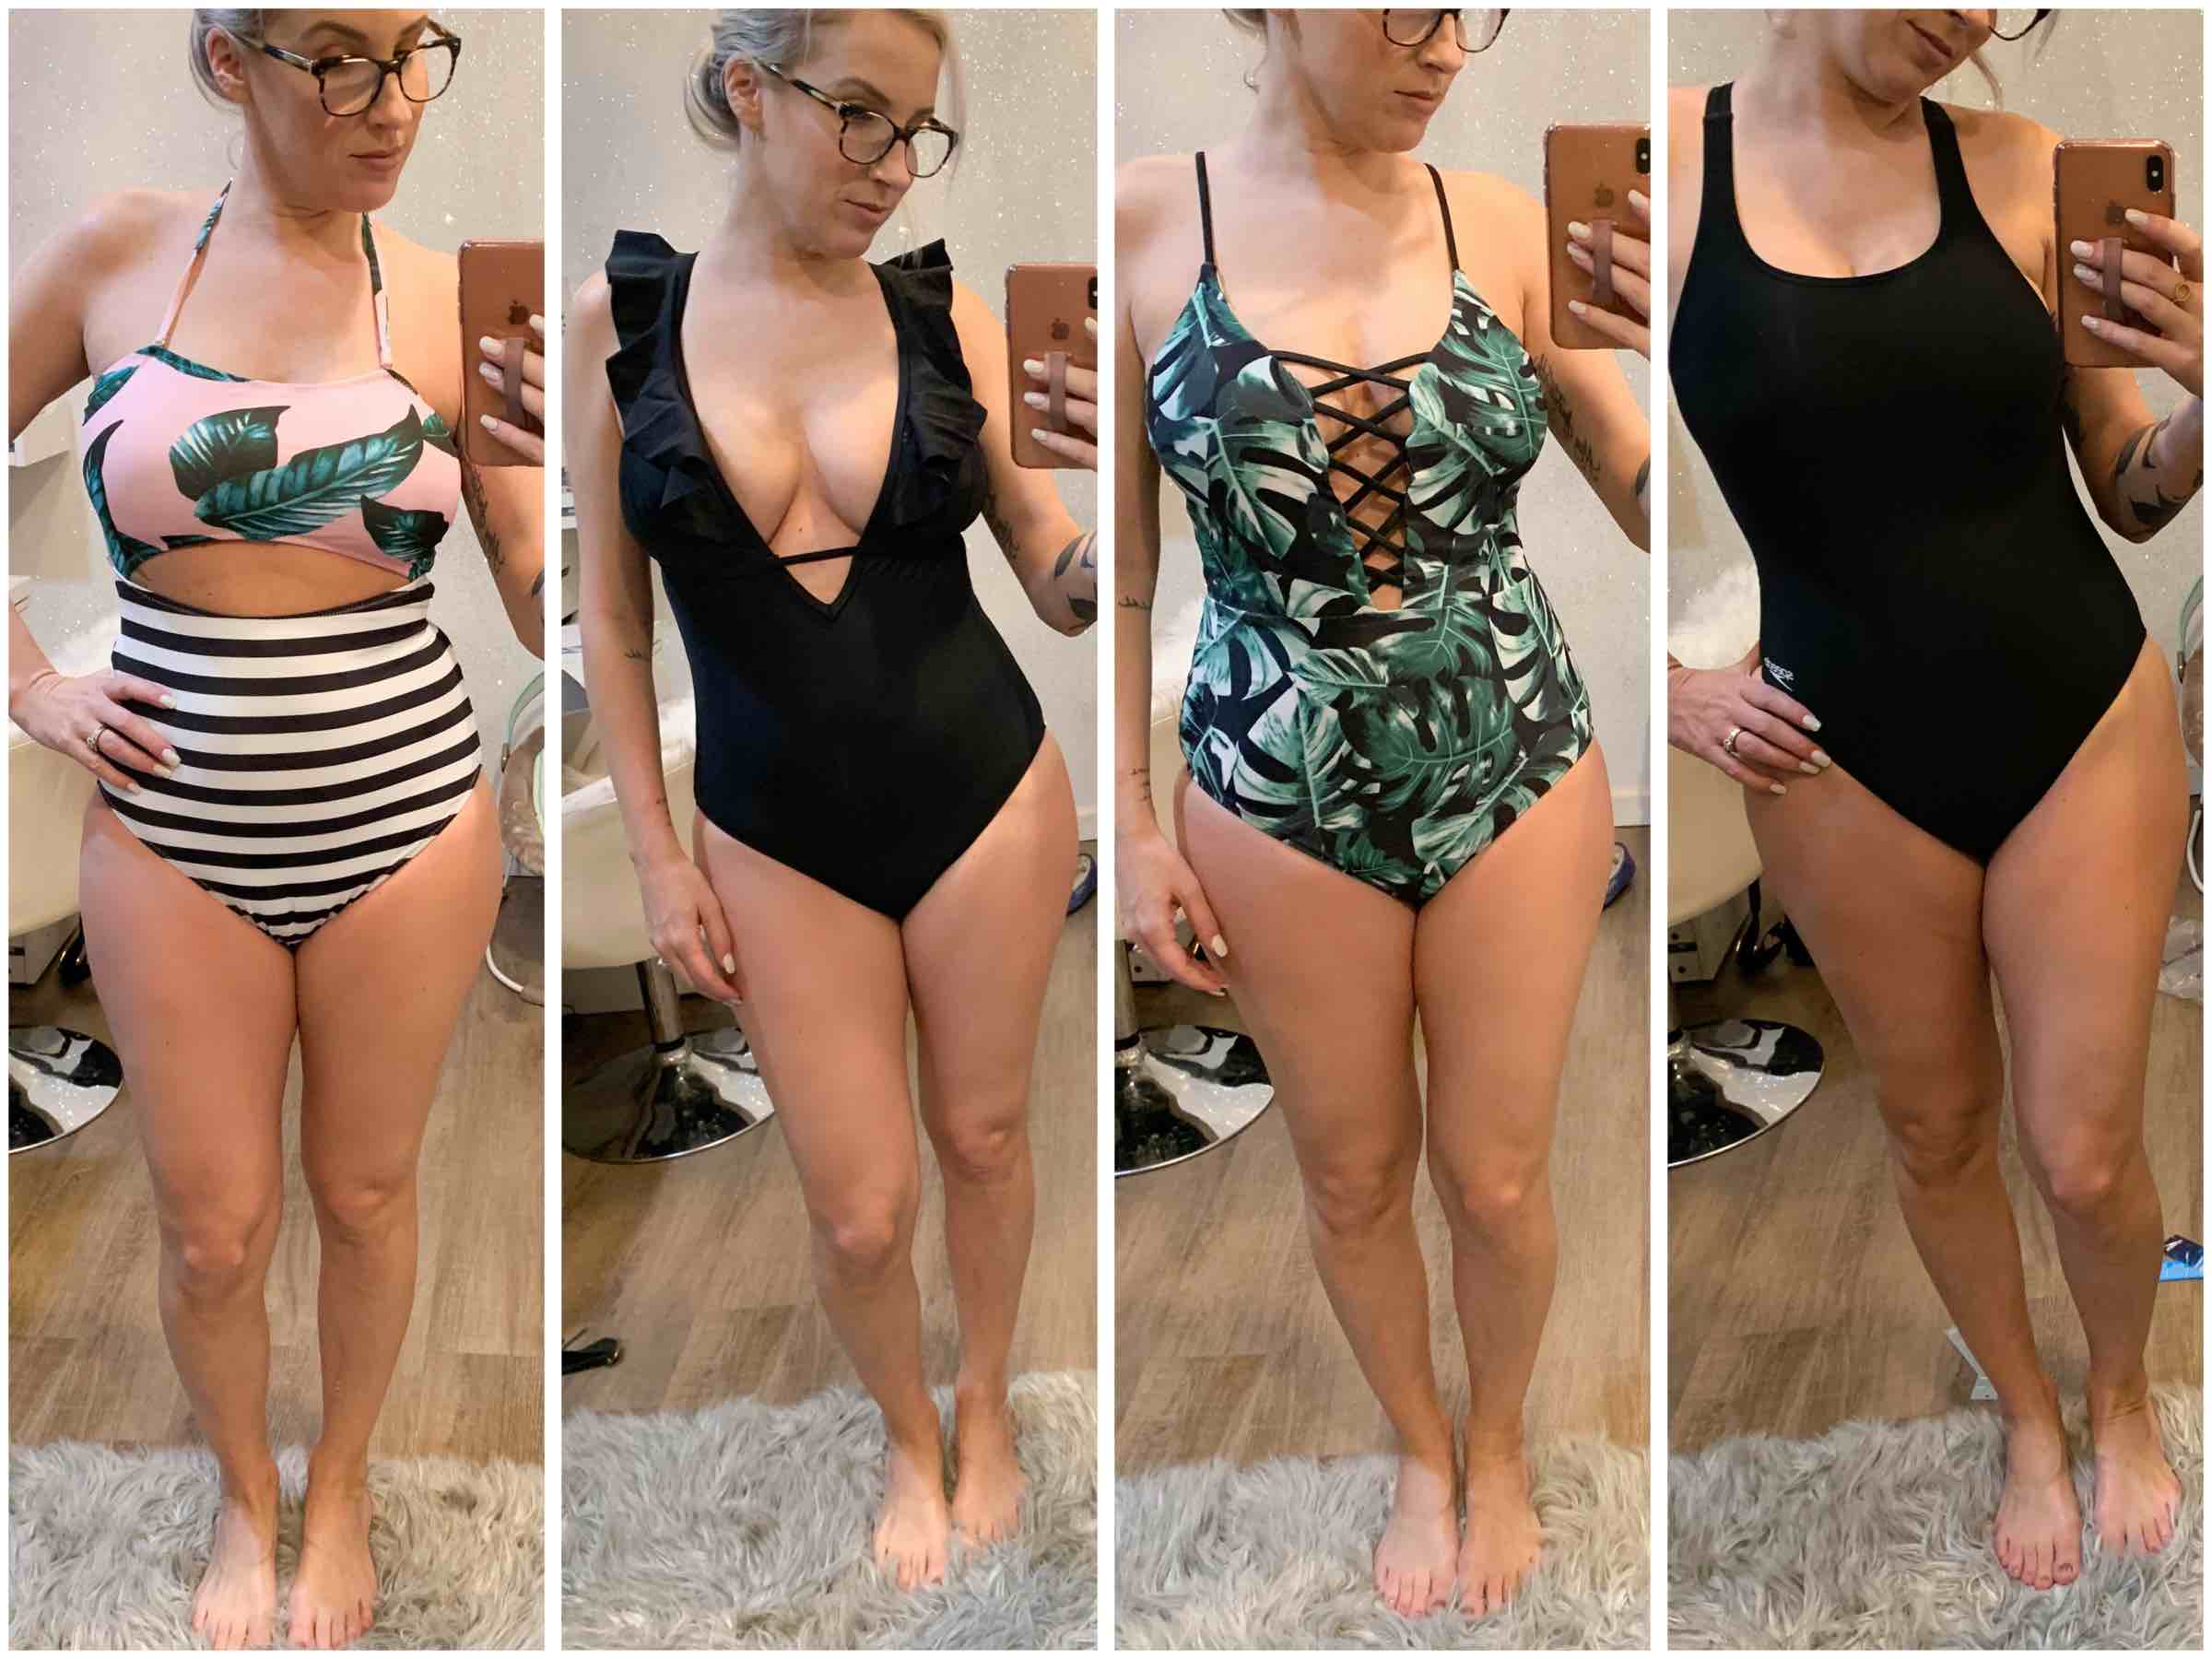 Bathing suit try